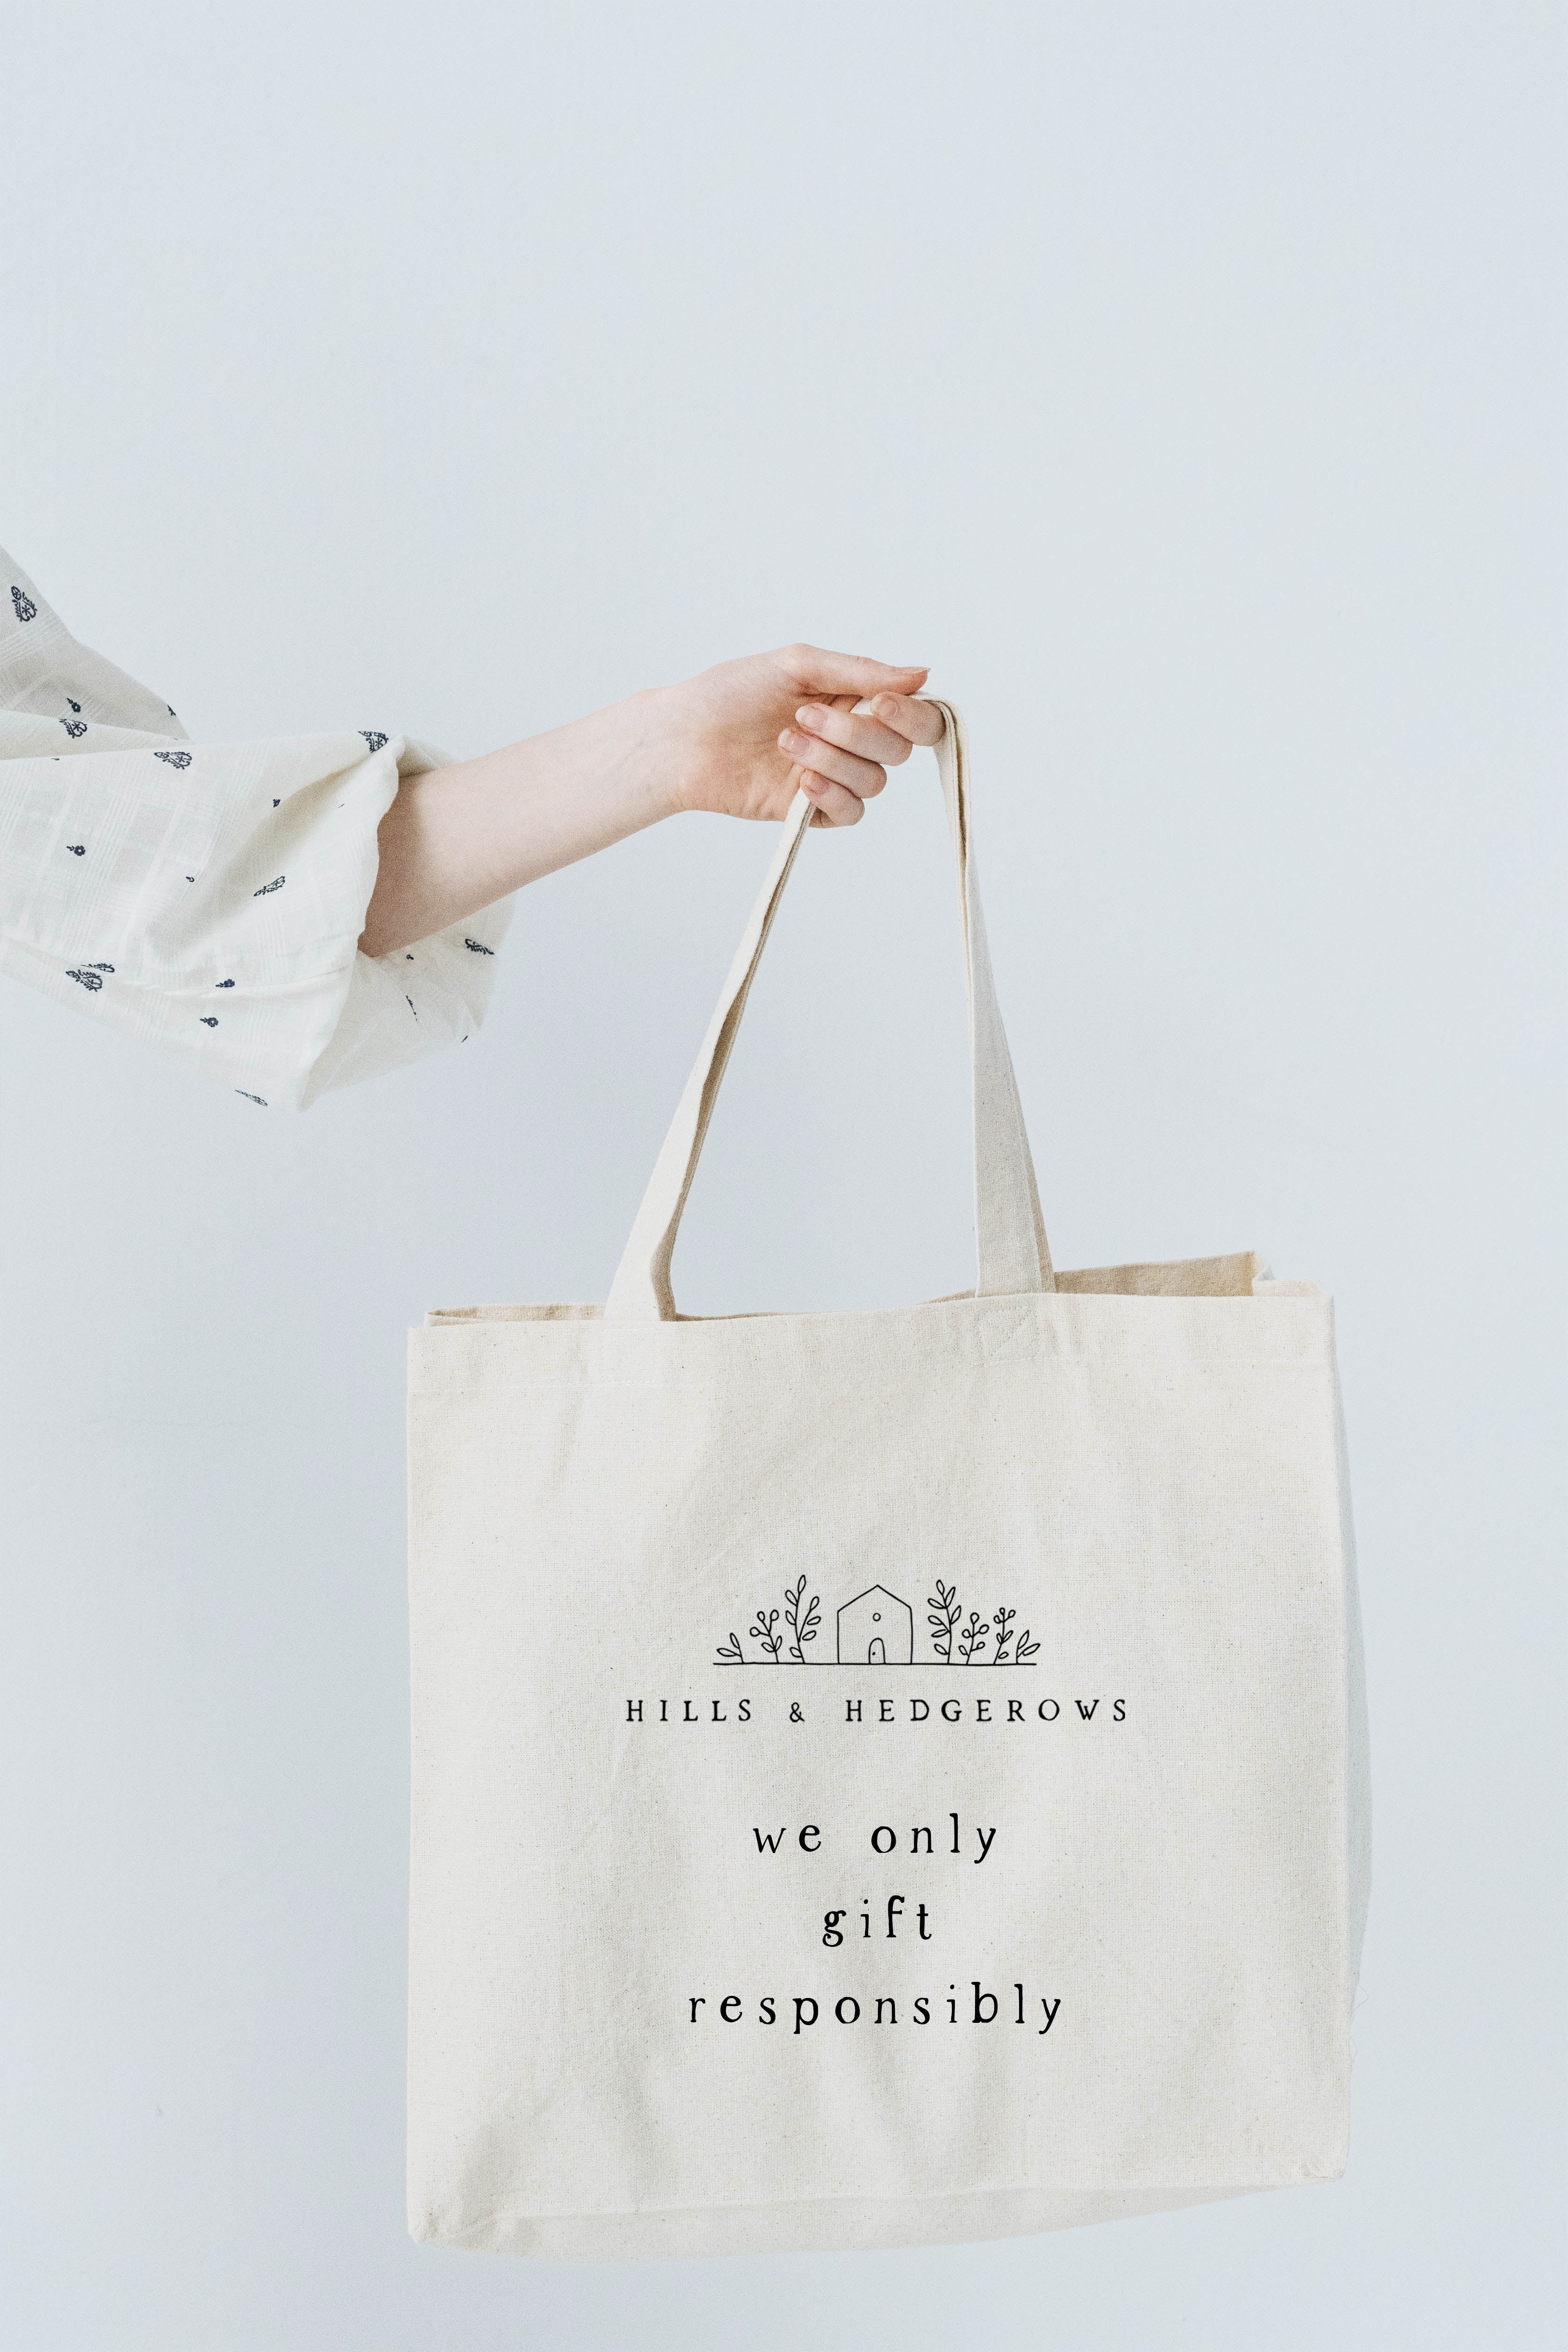 We only gift responsibly totes bag